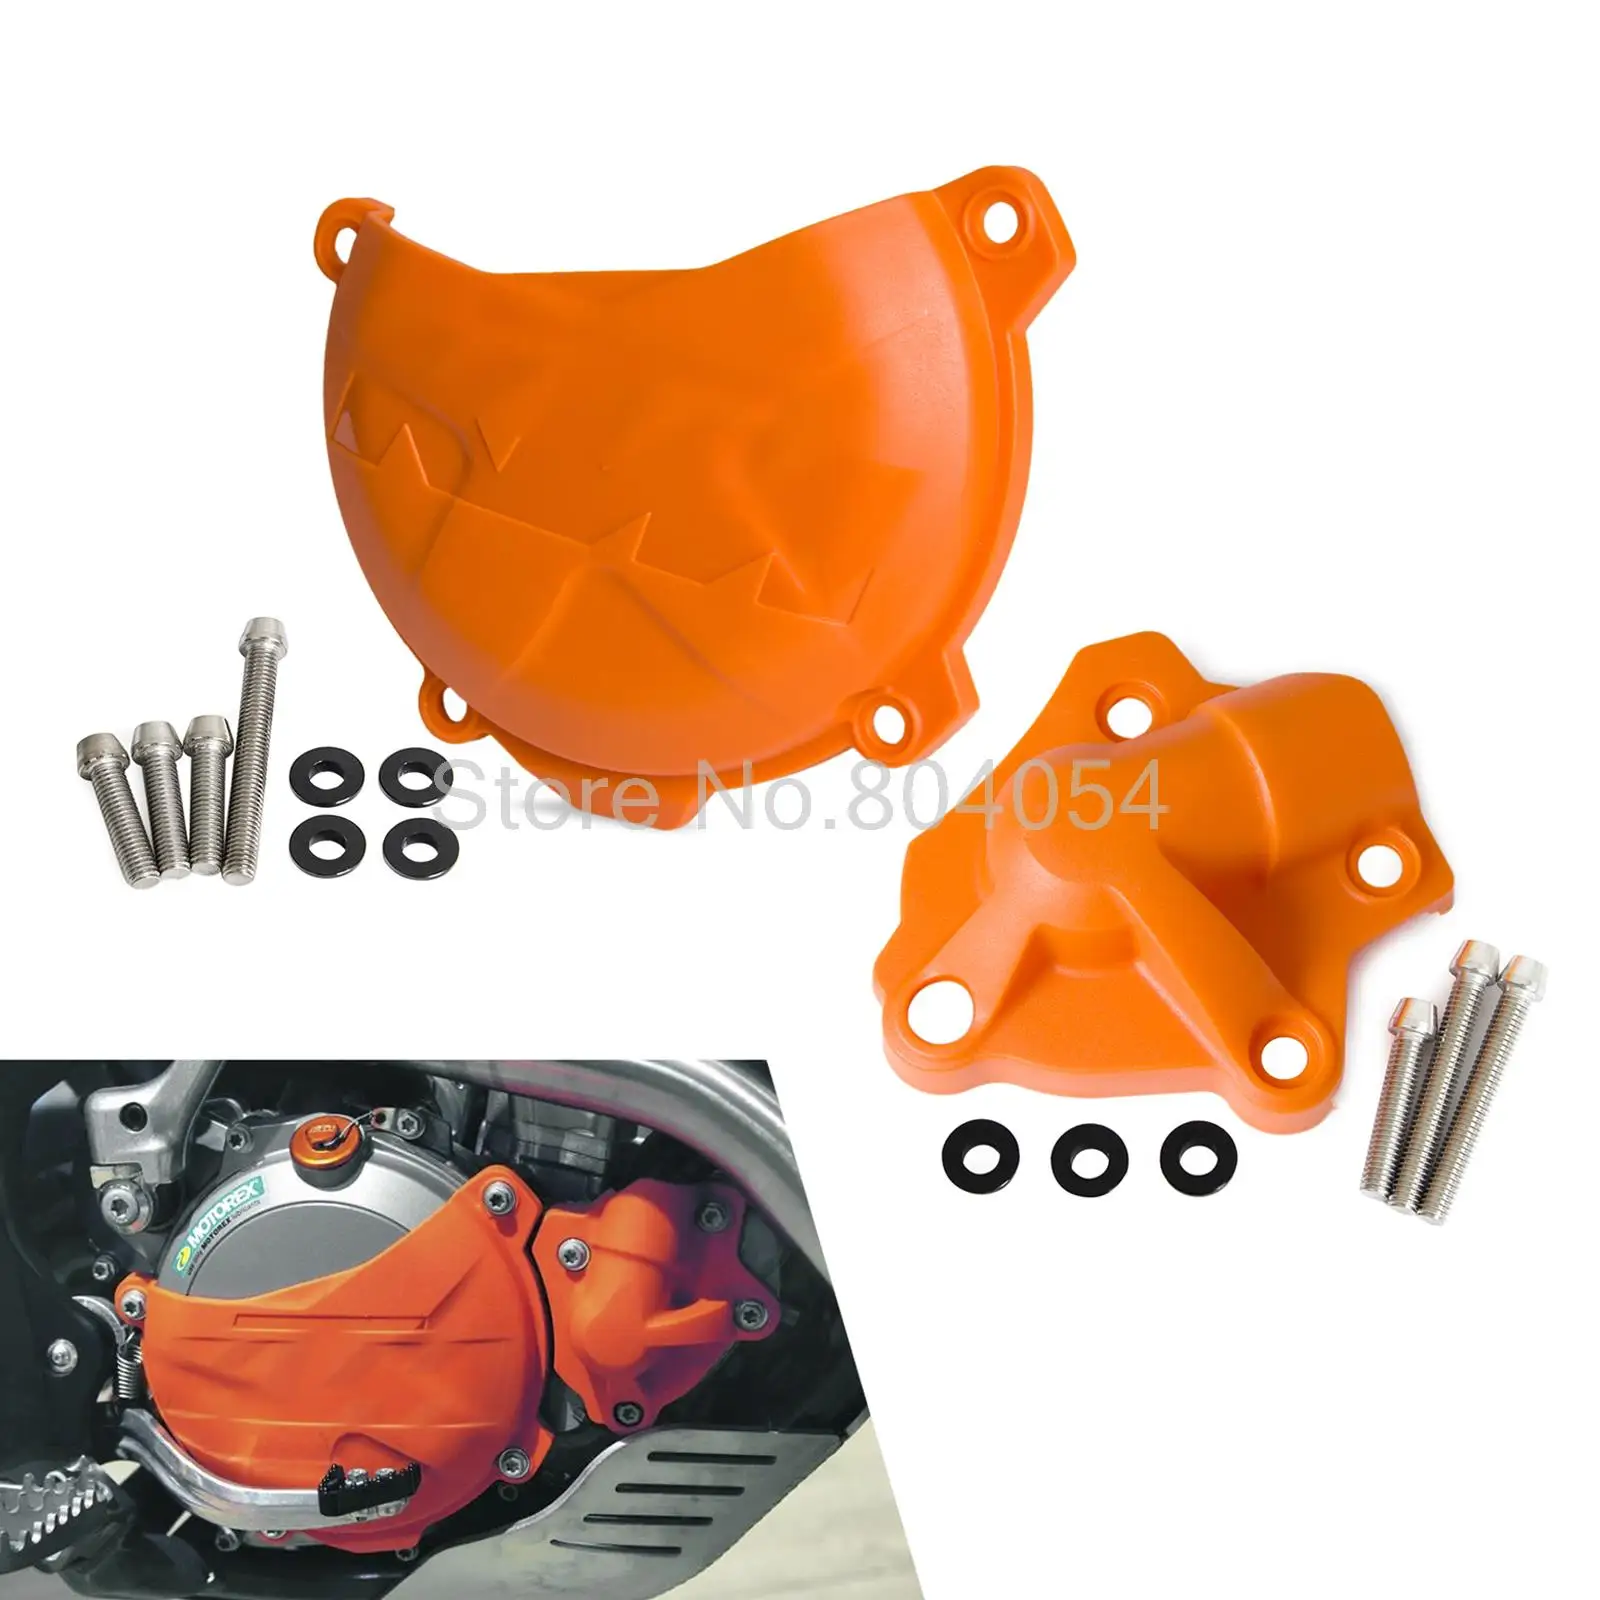 Clutch Cover Protector Water Pump Cover Protector for KTM KTM 250 SX-F 2013- KTM 350 XCF-W 2013-2016 FREERIDE 350 2013-2016